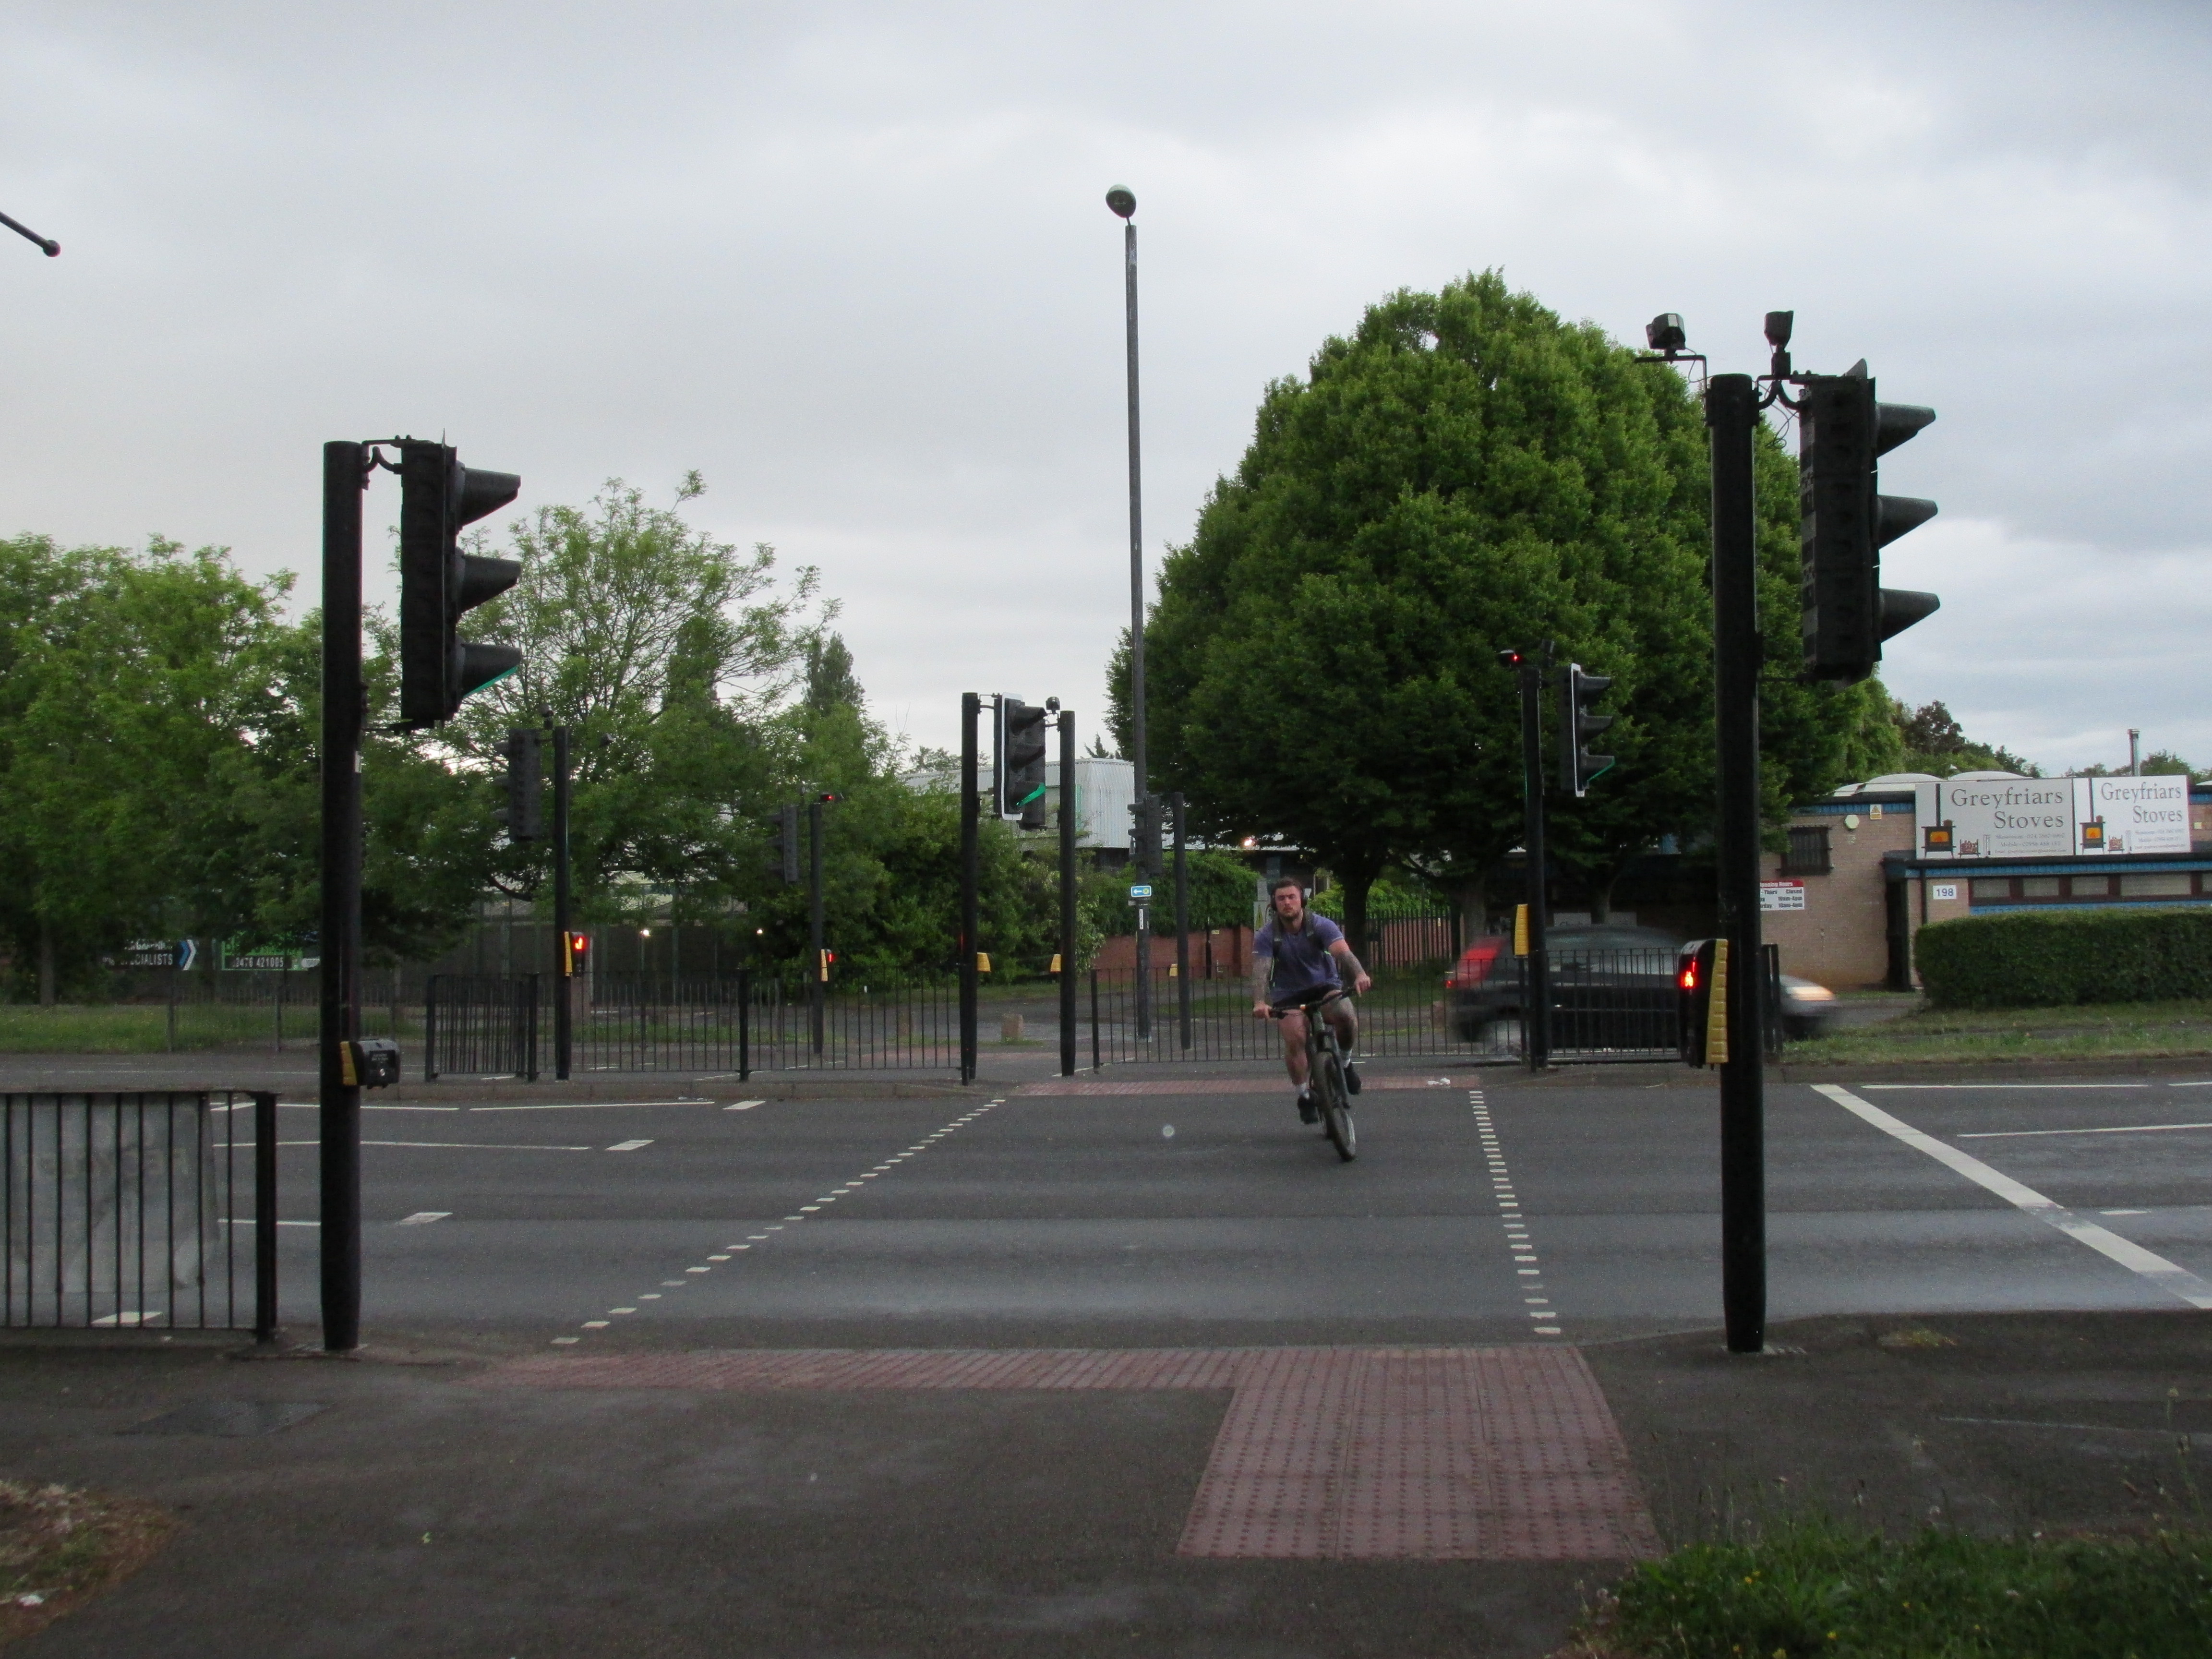 A45 Canley Roundabout crossing - the main current recommended route into Coventry from campus